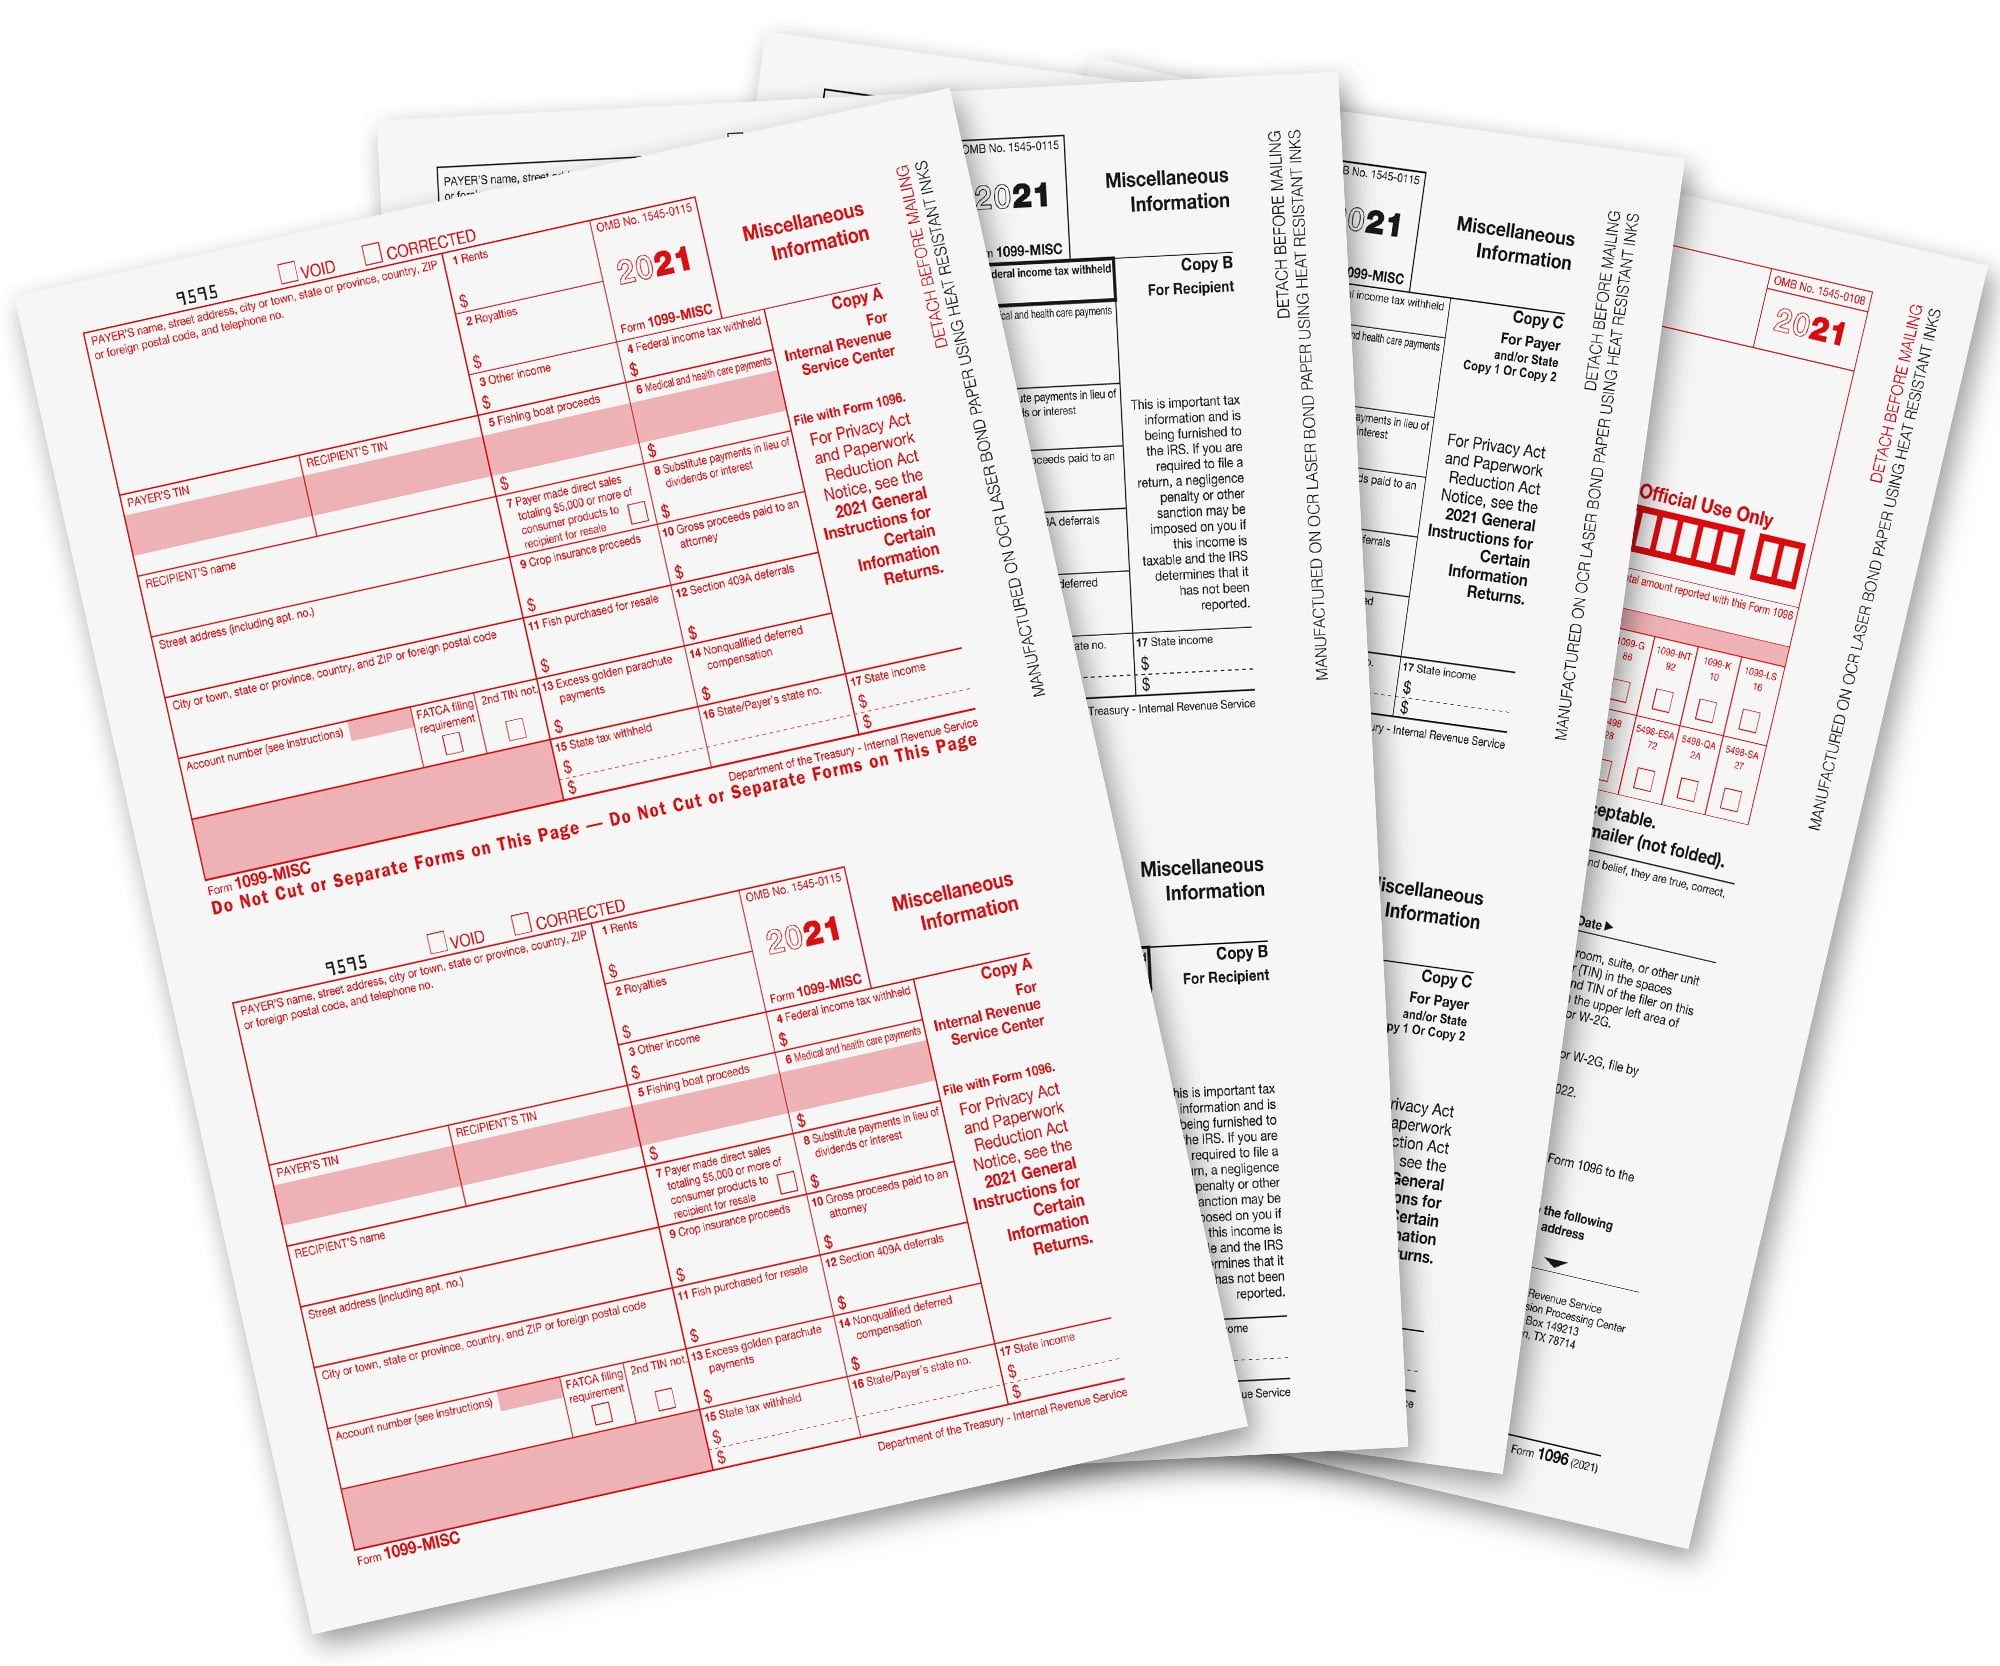 Kit for 50 Vendors with 50 Self-Seal Envelopes in Value Pack Tax Laser Forms Complete 1099 Misc 4-Part 2018 Tax Form Set and 1096 Great for QuickBooks and Accounting Software 